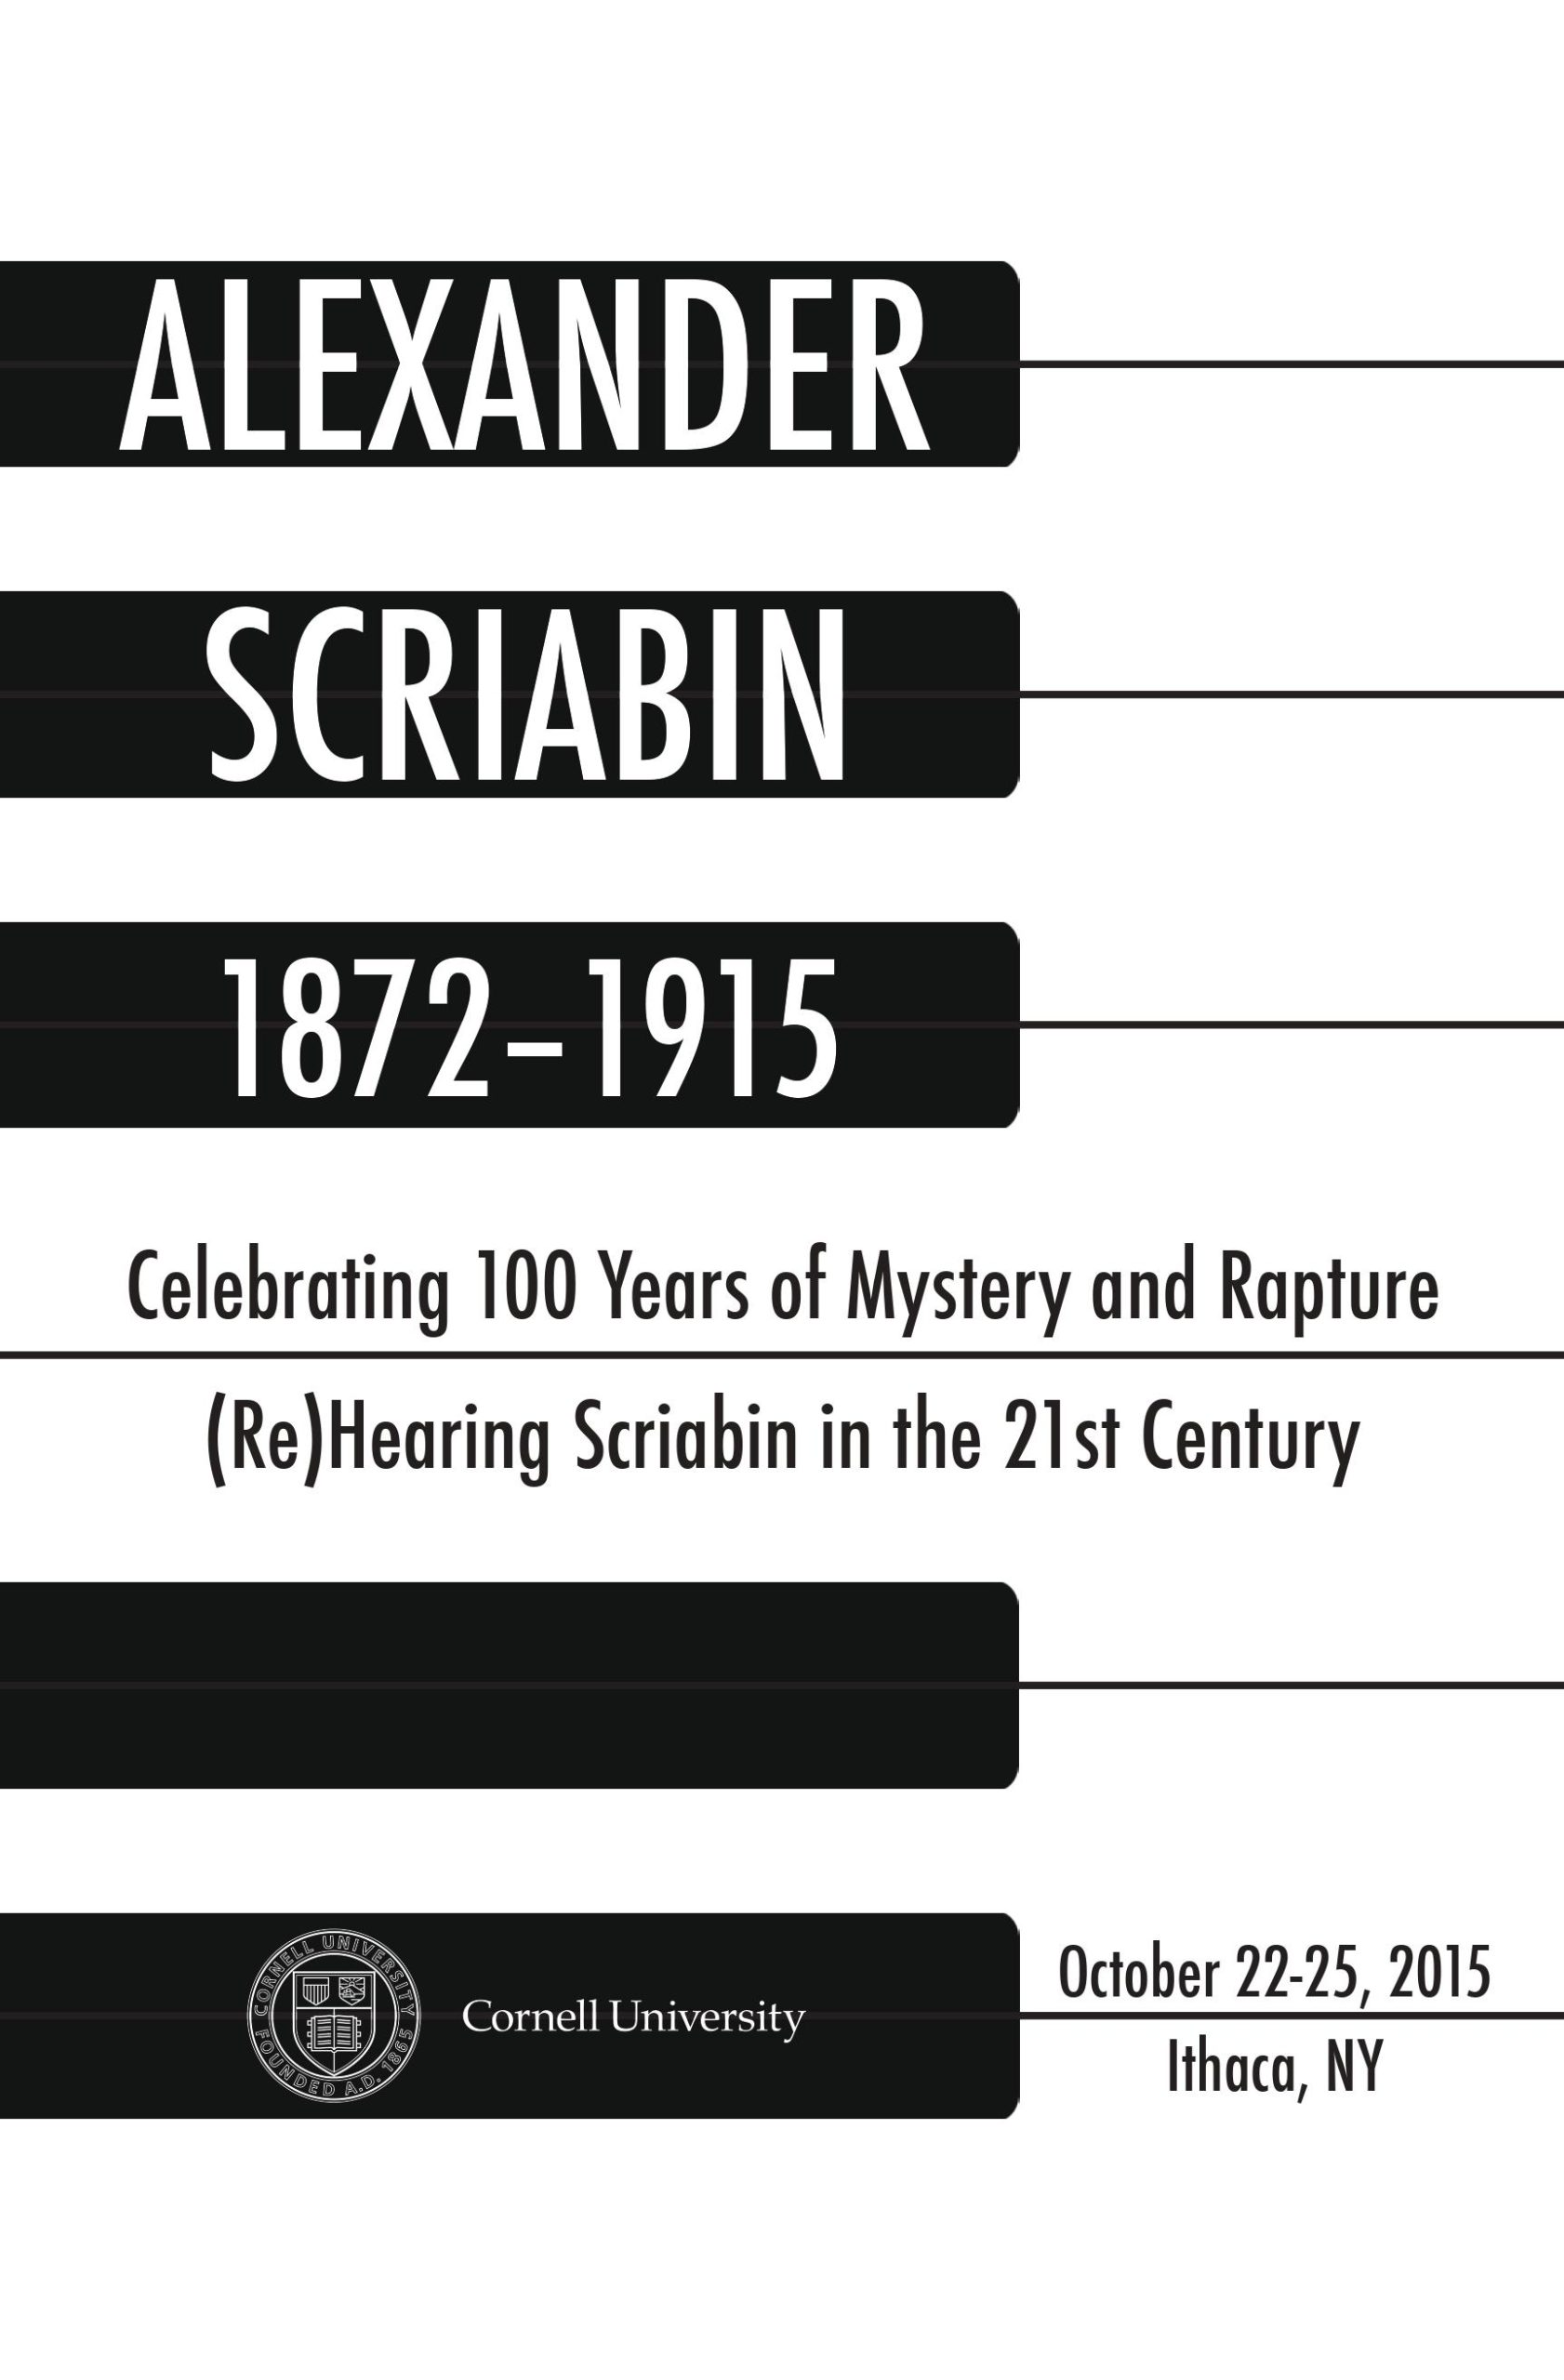 Poster for Alexander Scriabin: Celebrating 100 Years of Mystery and Rapture